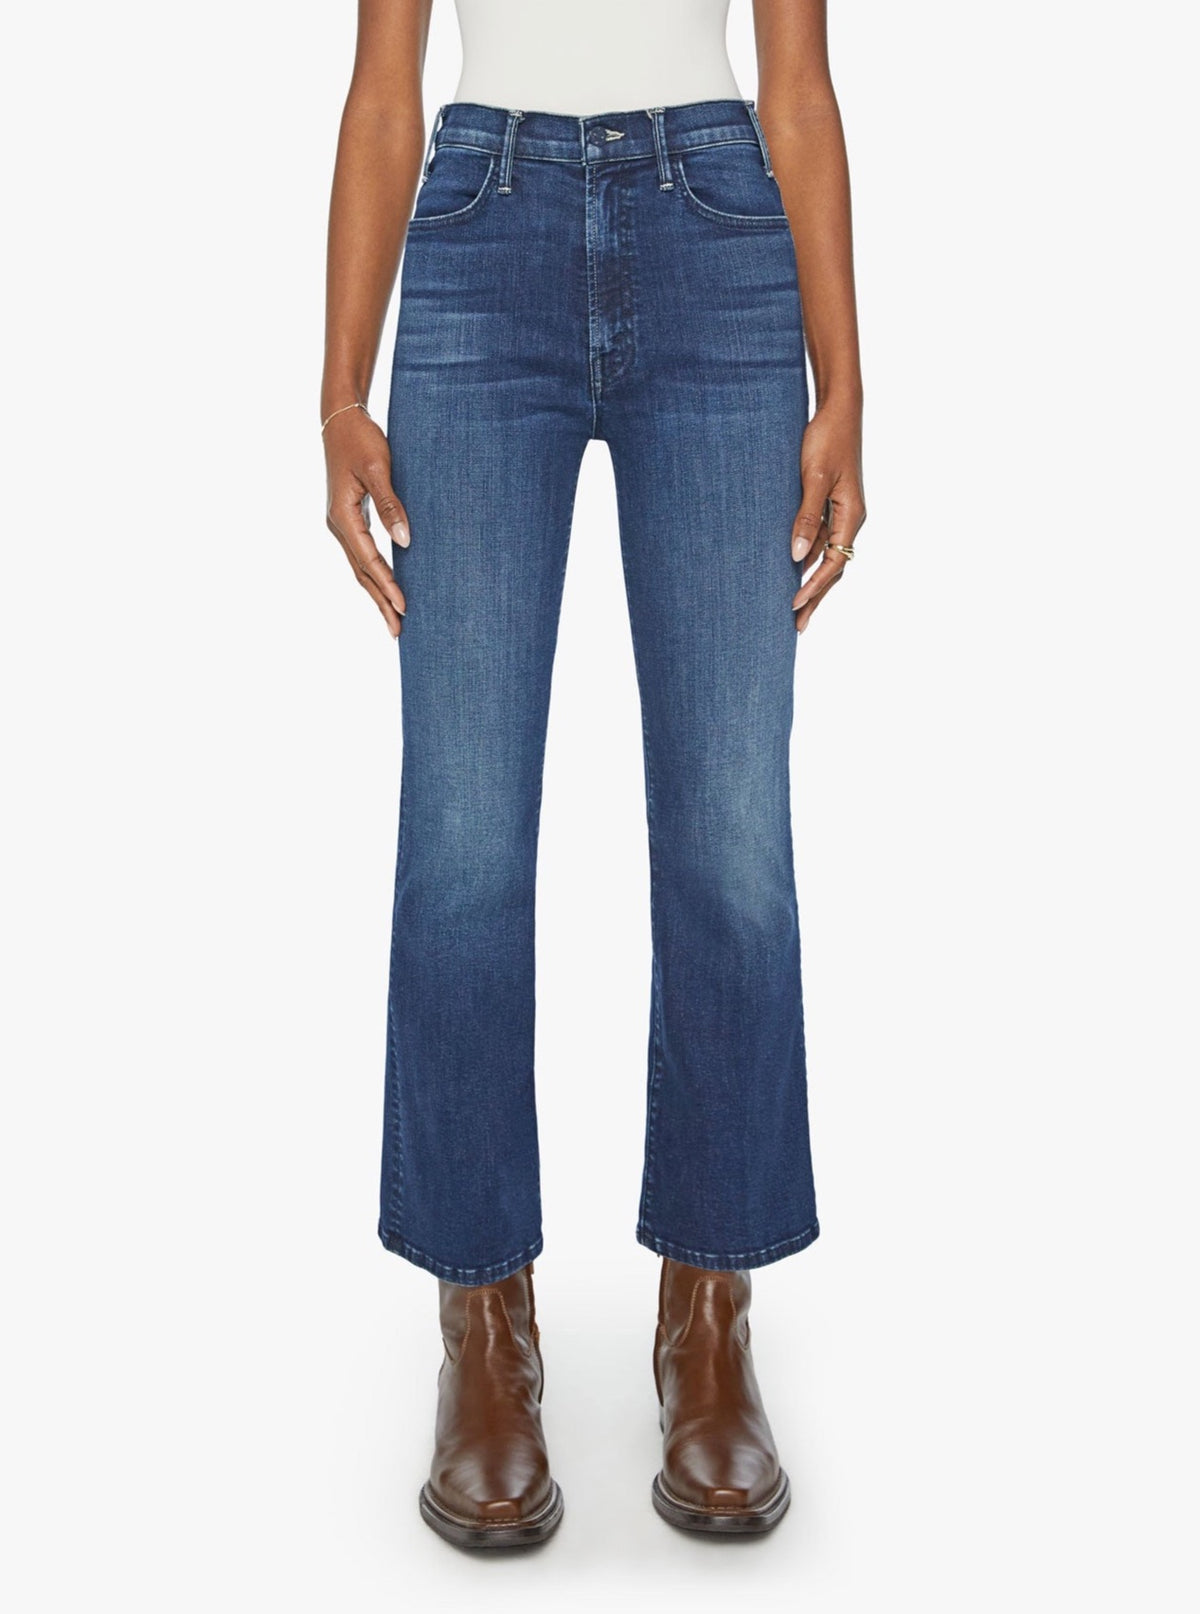 D JEANS Women's High-Waisted 27 Ankle Jeans - Bob's Stores